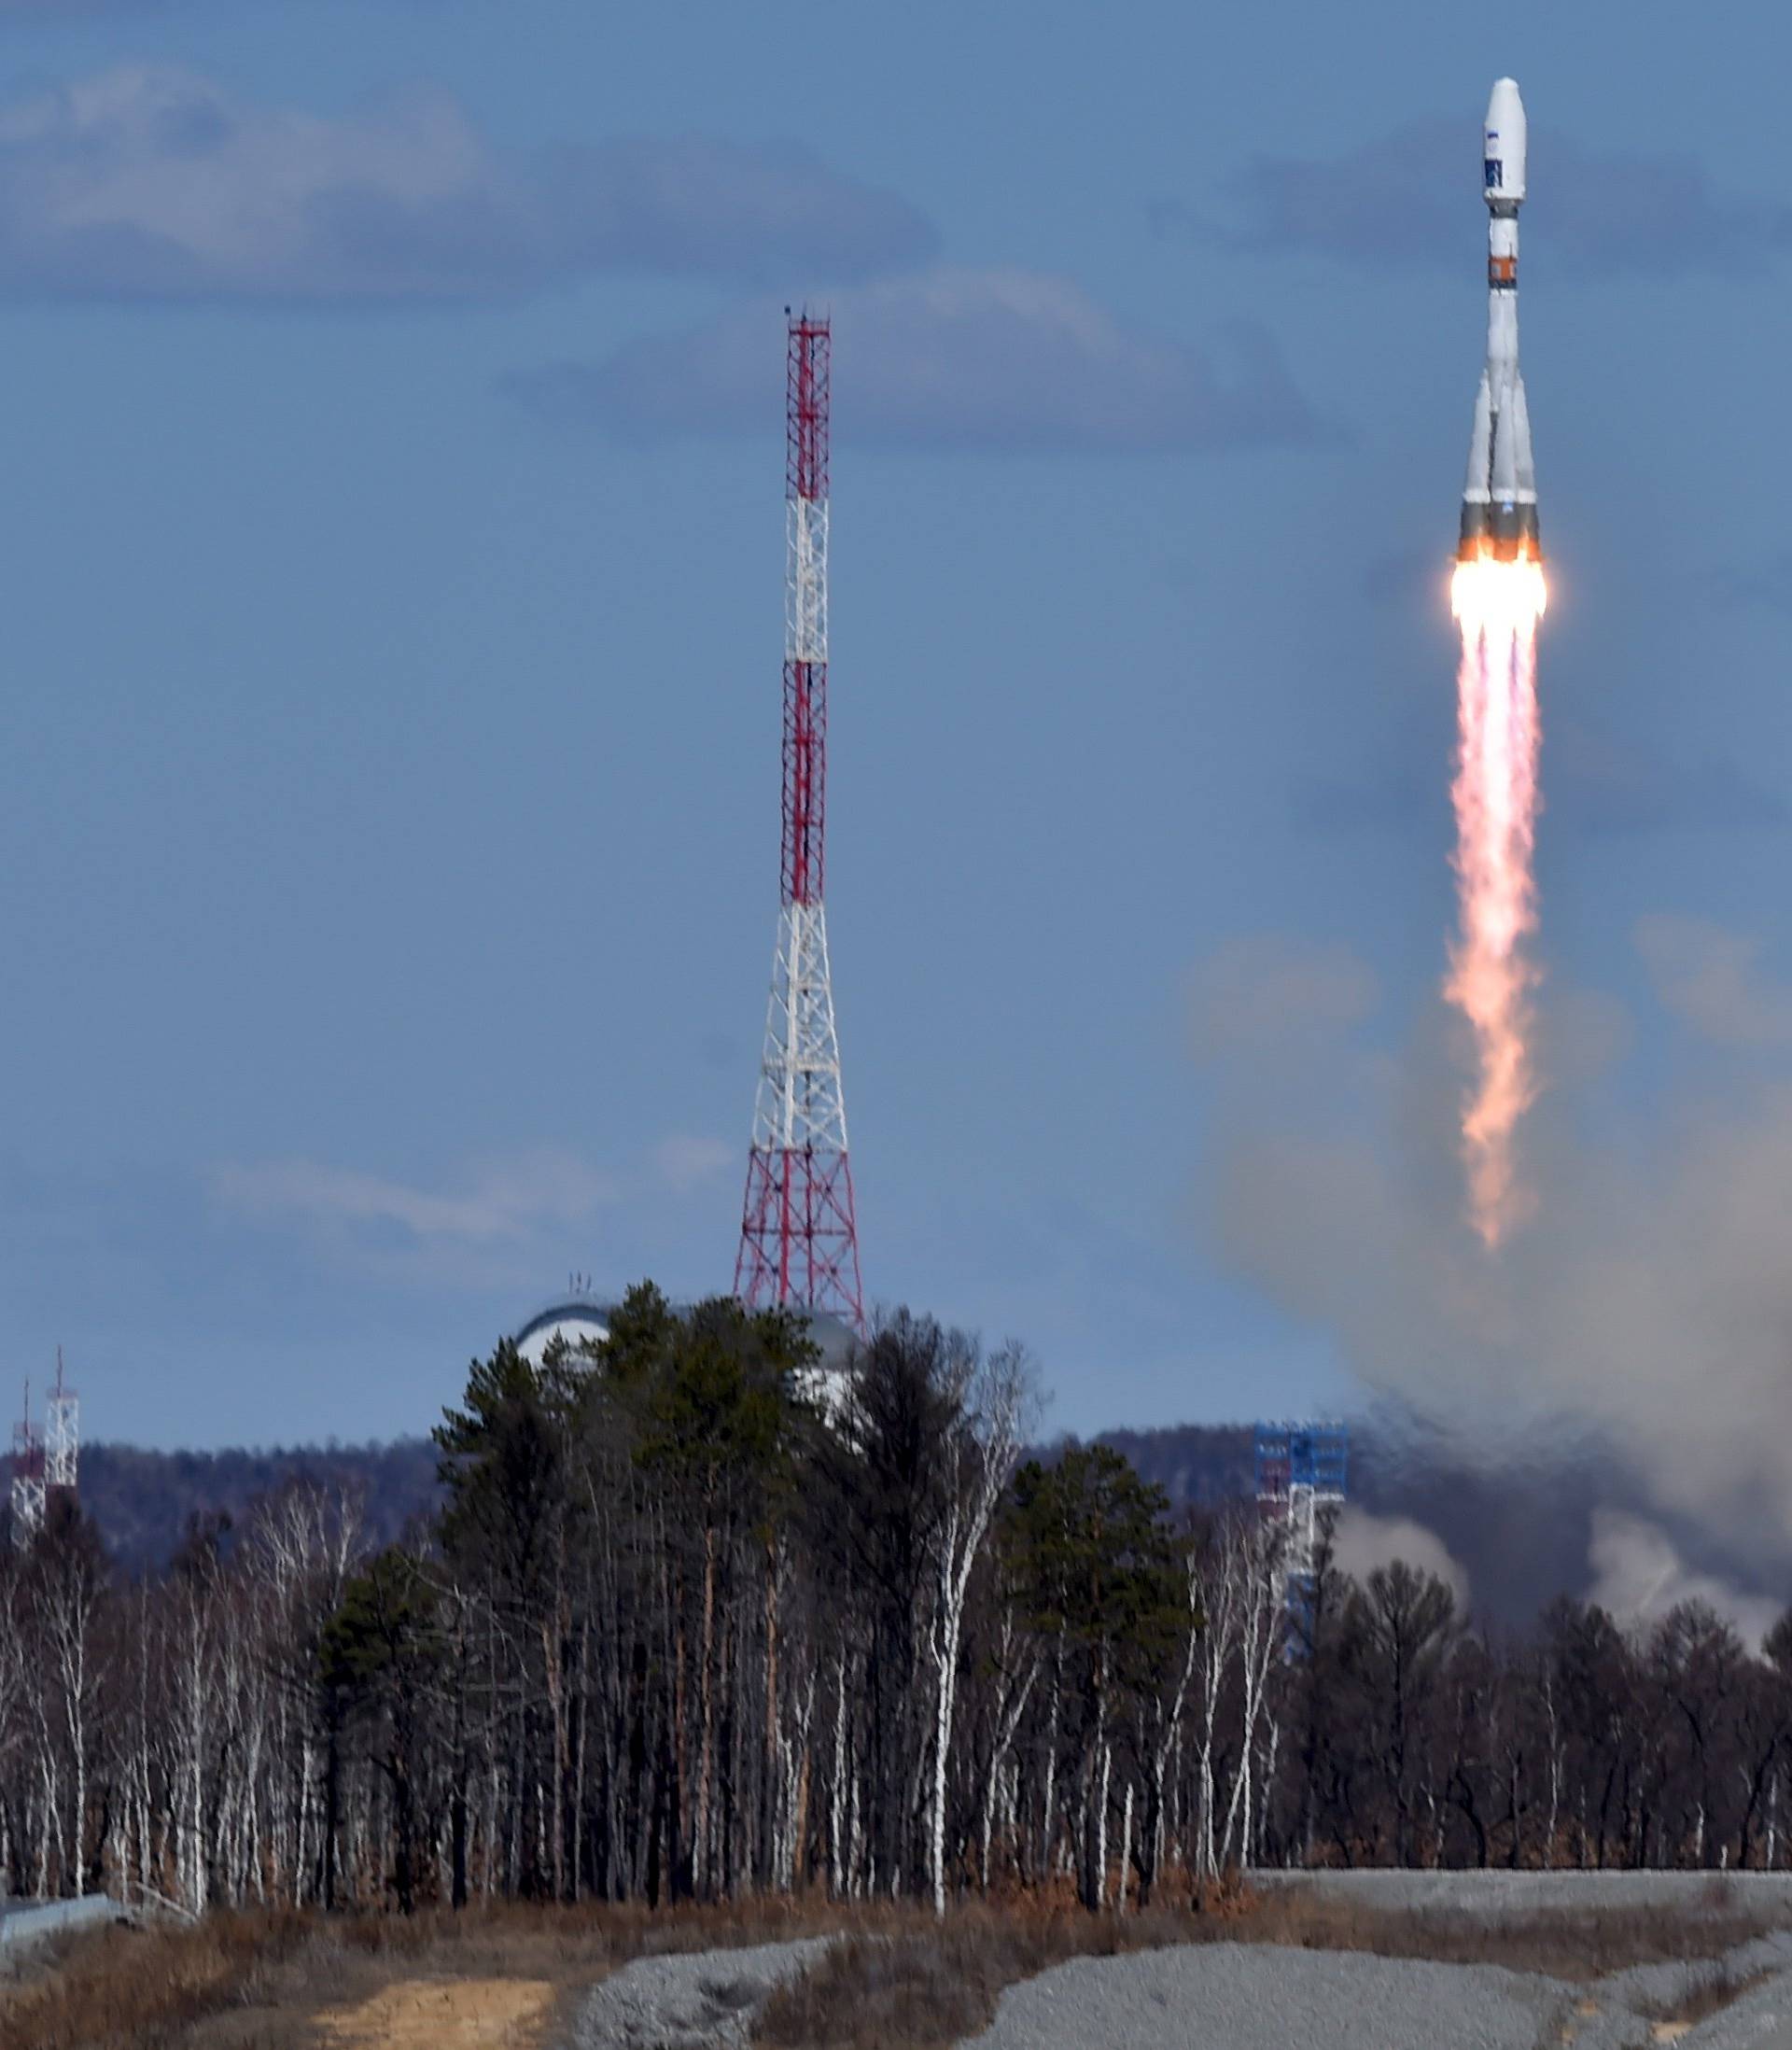 A Russian Soyuz 2.1a rocket carrying Lomonosov, Aist-2D and SamSat-218 satellites leaves a trail of smoke as it lifts off from the new Vostochny cosmodrome outside the city of Uglegorsk